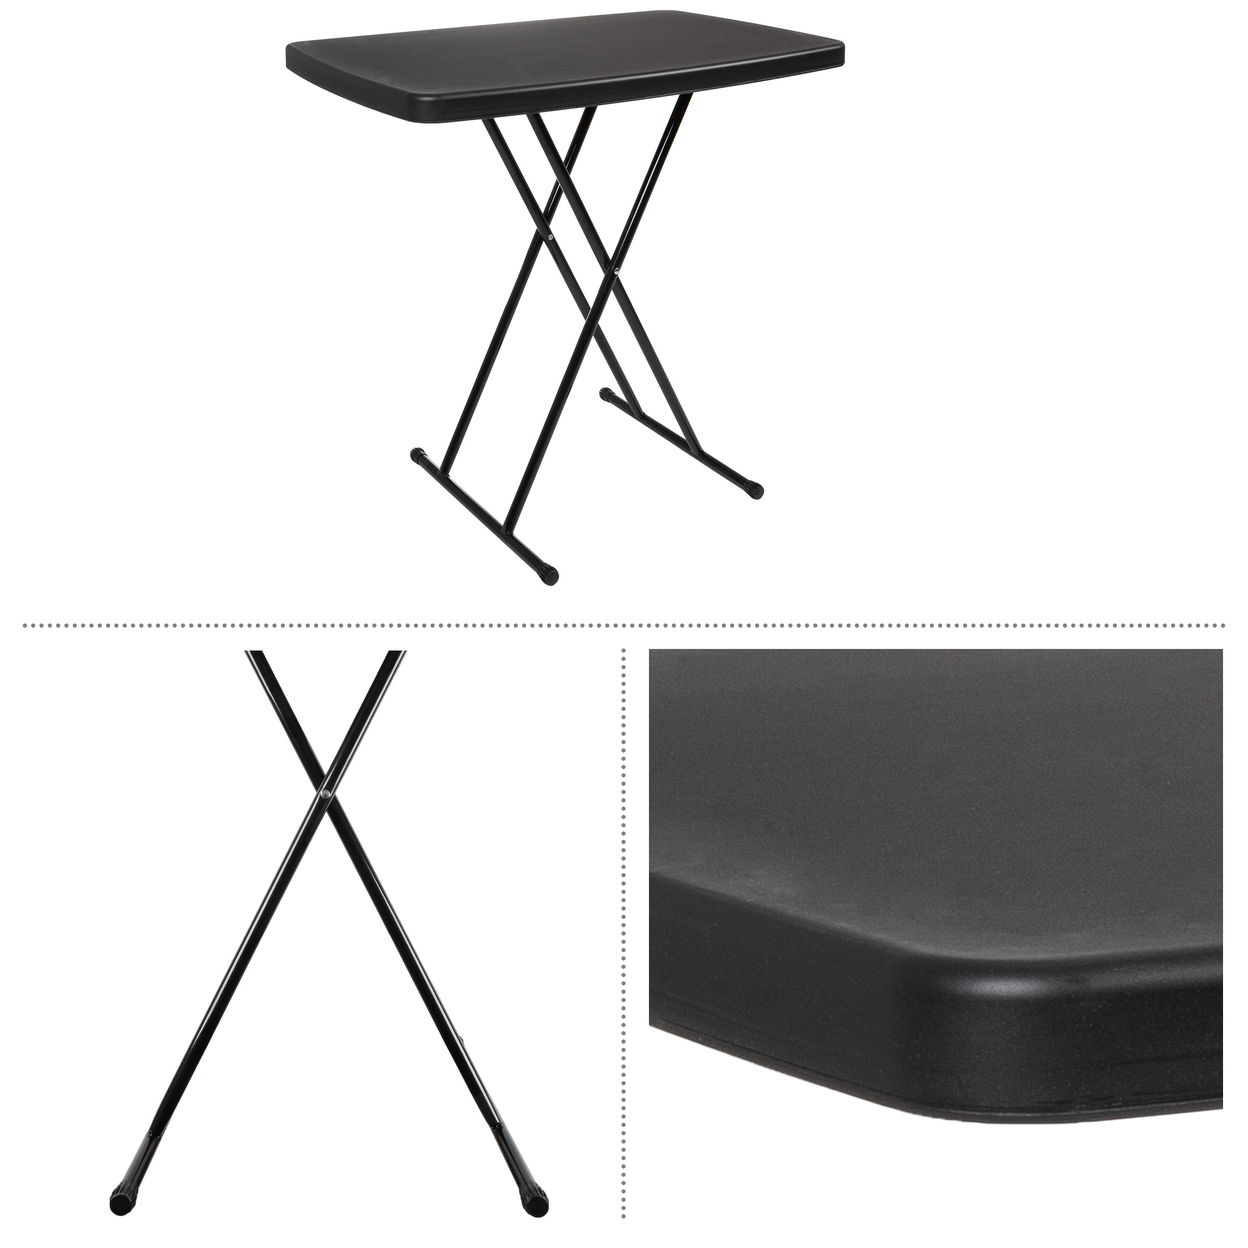 Folding Table Set 2 Lightweight Portable Tables Small Plastic Desk For Camping